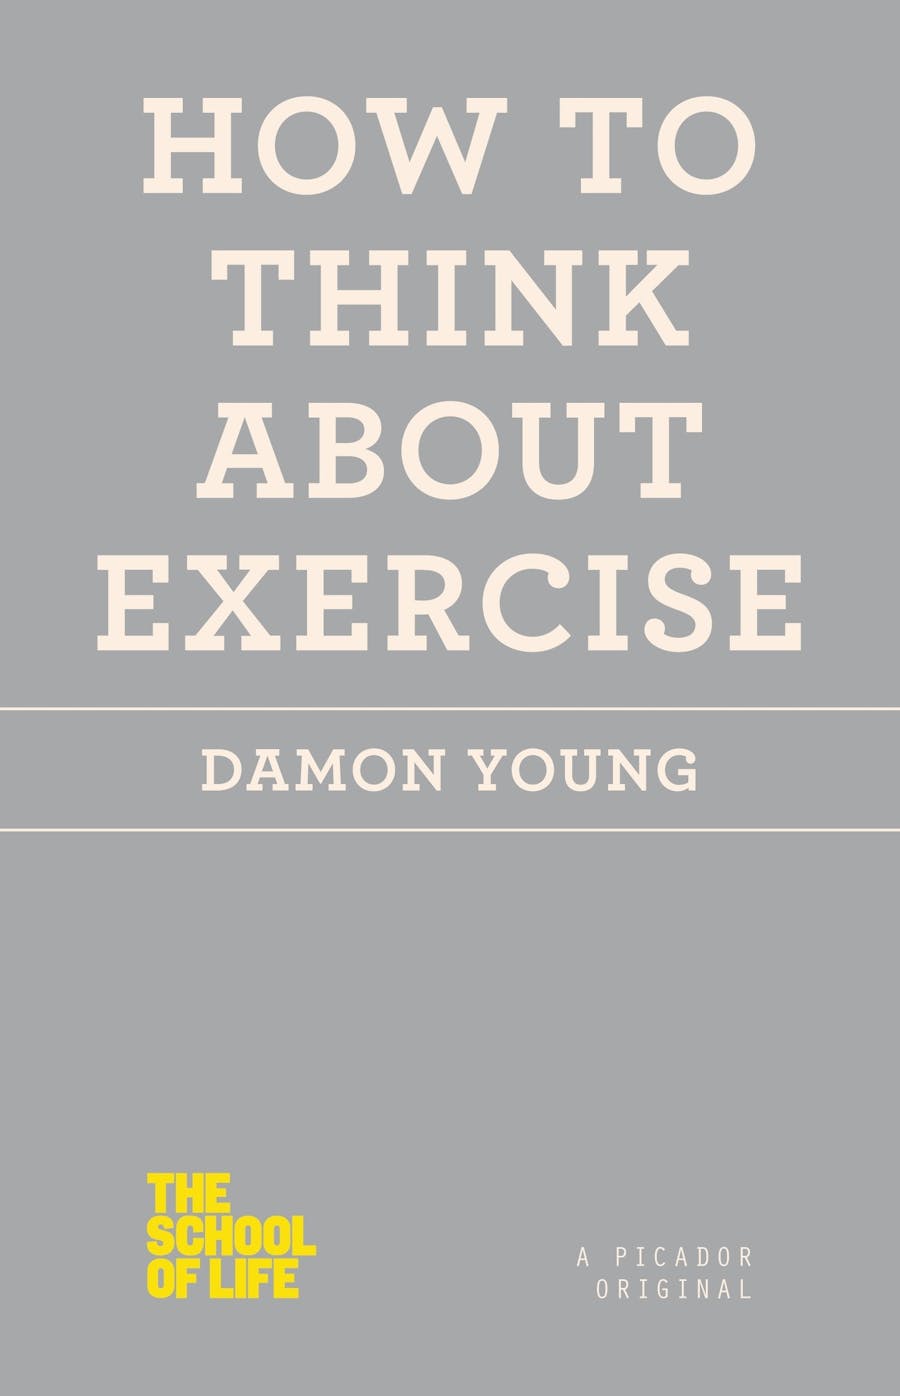 How to Think About Exercise by Damon Young